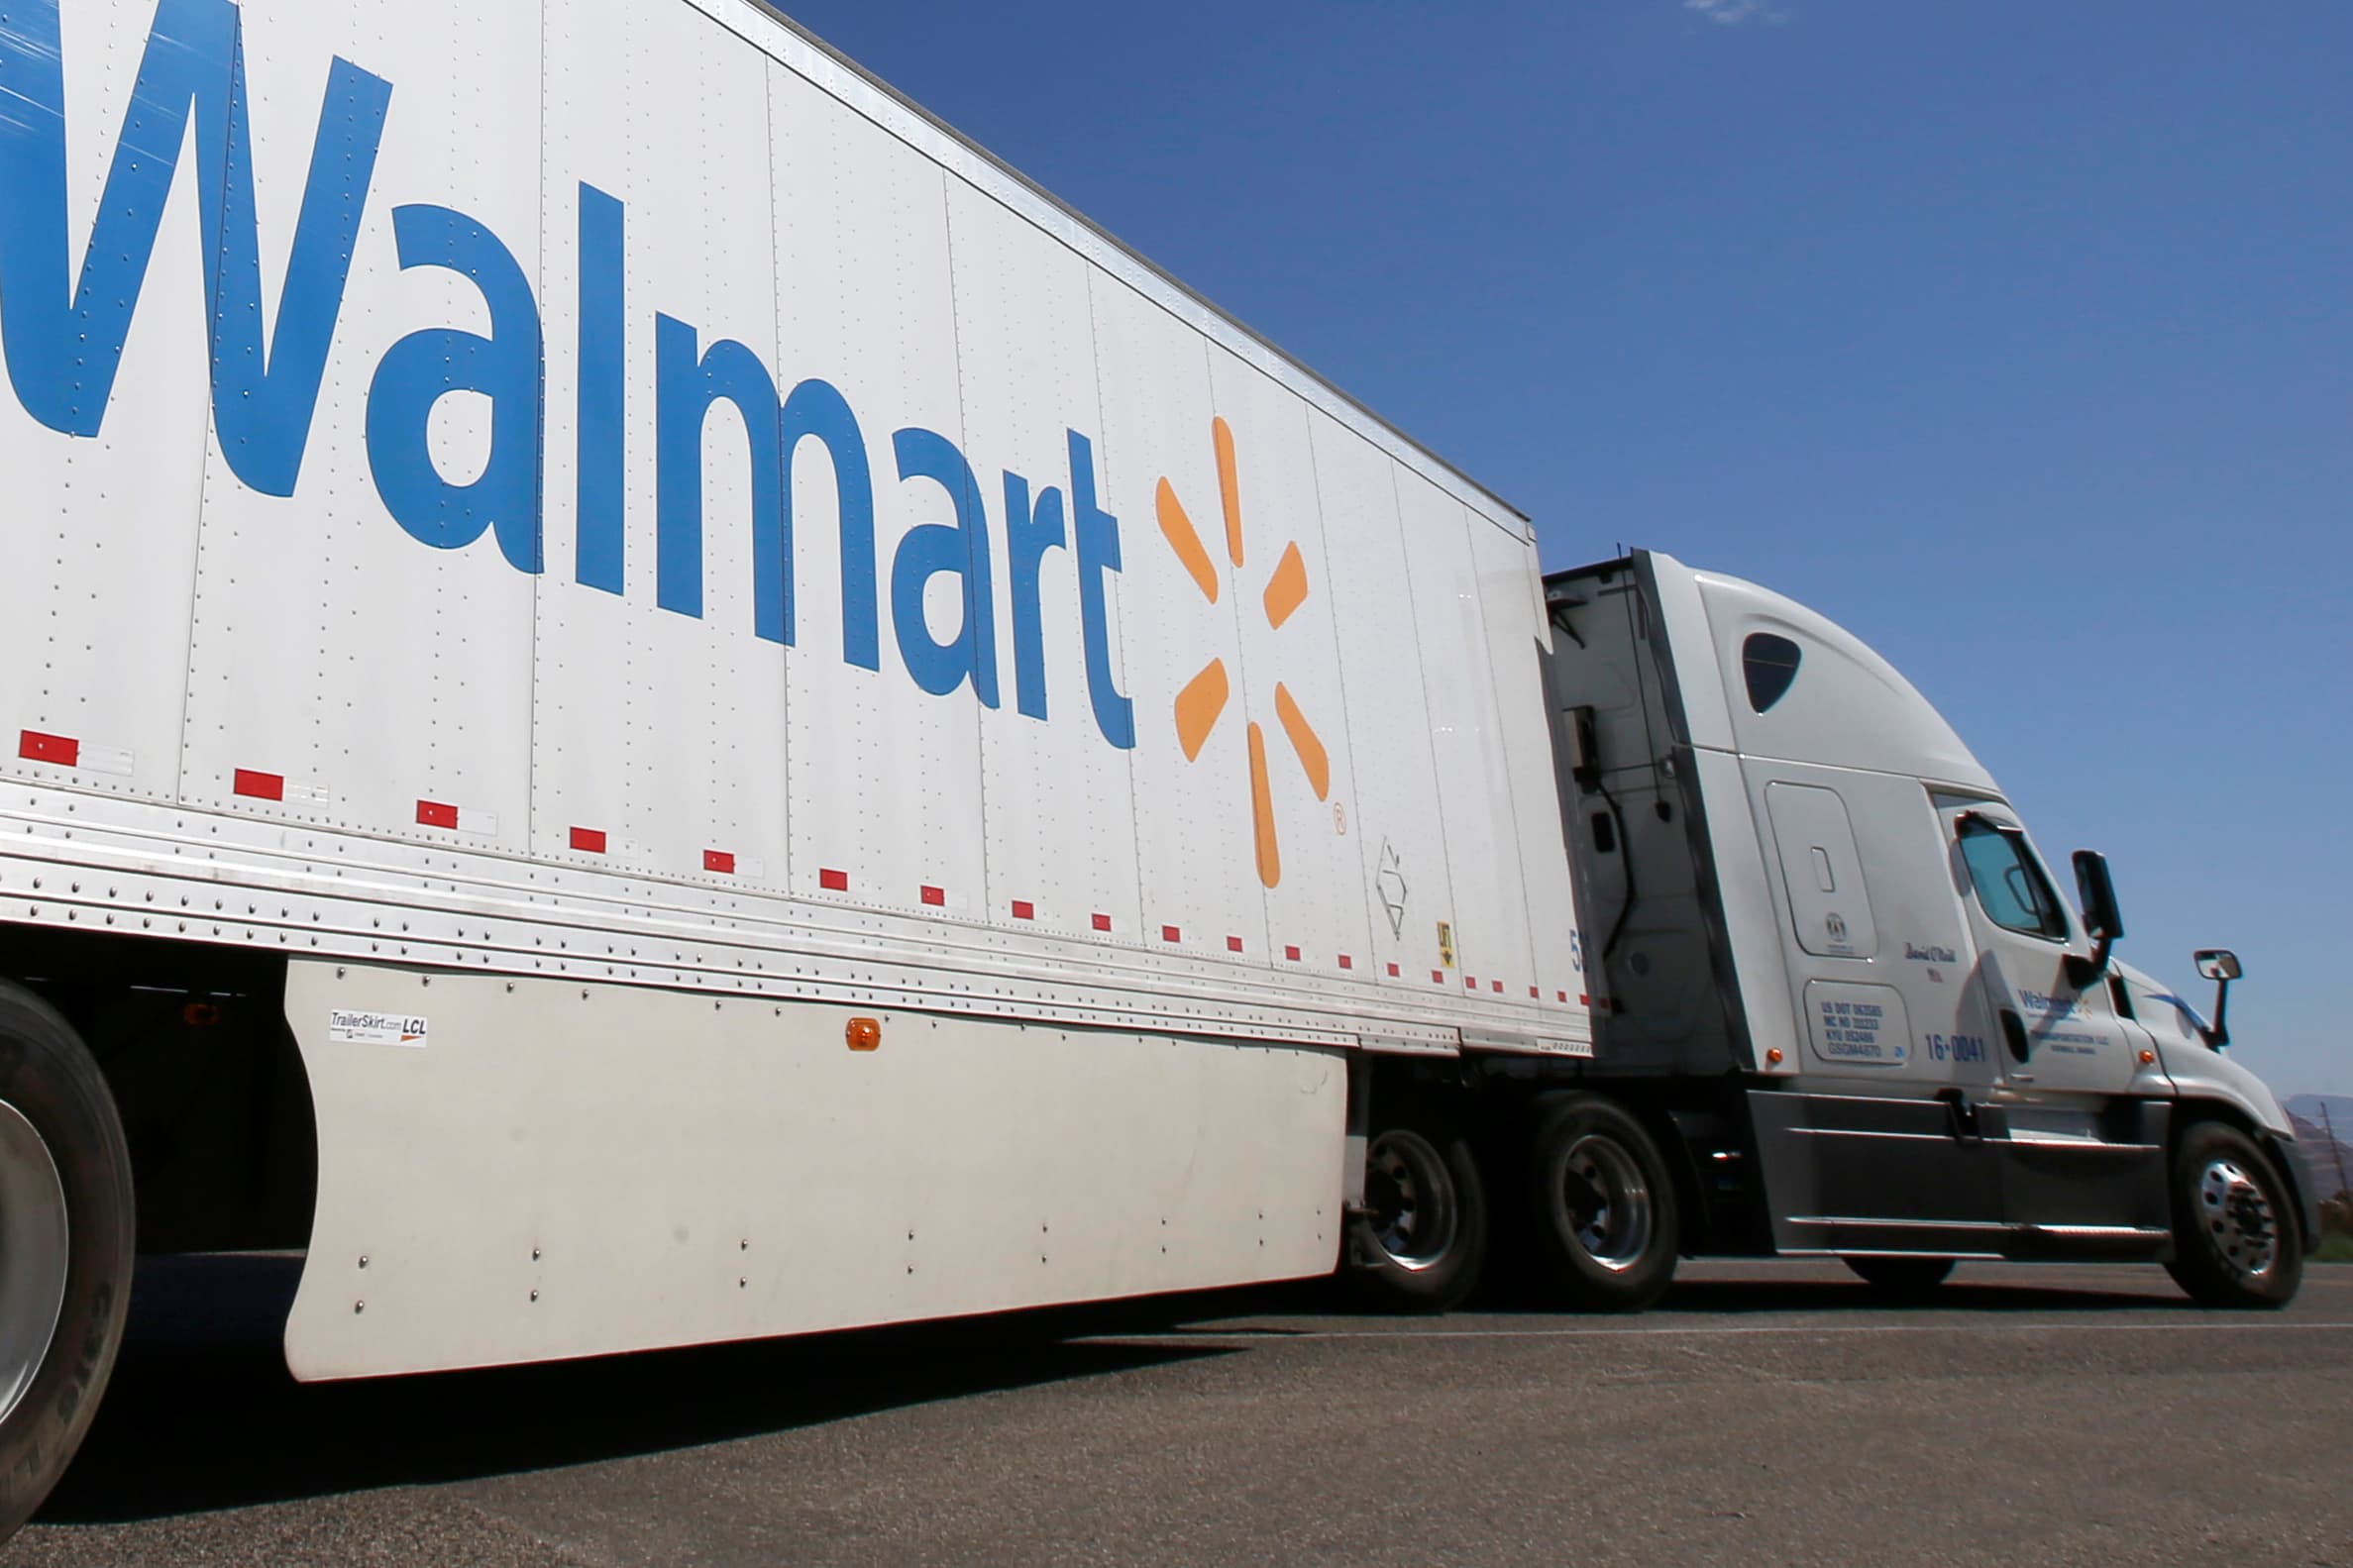 Walmart says it is raising pay for truck drivers, starting training program